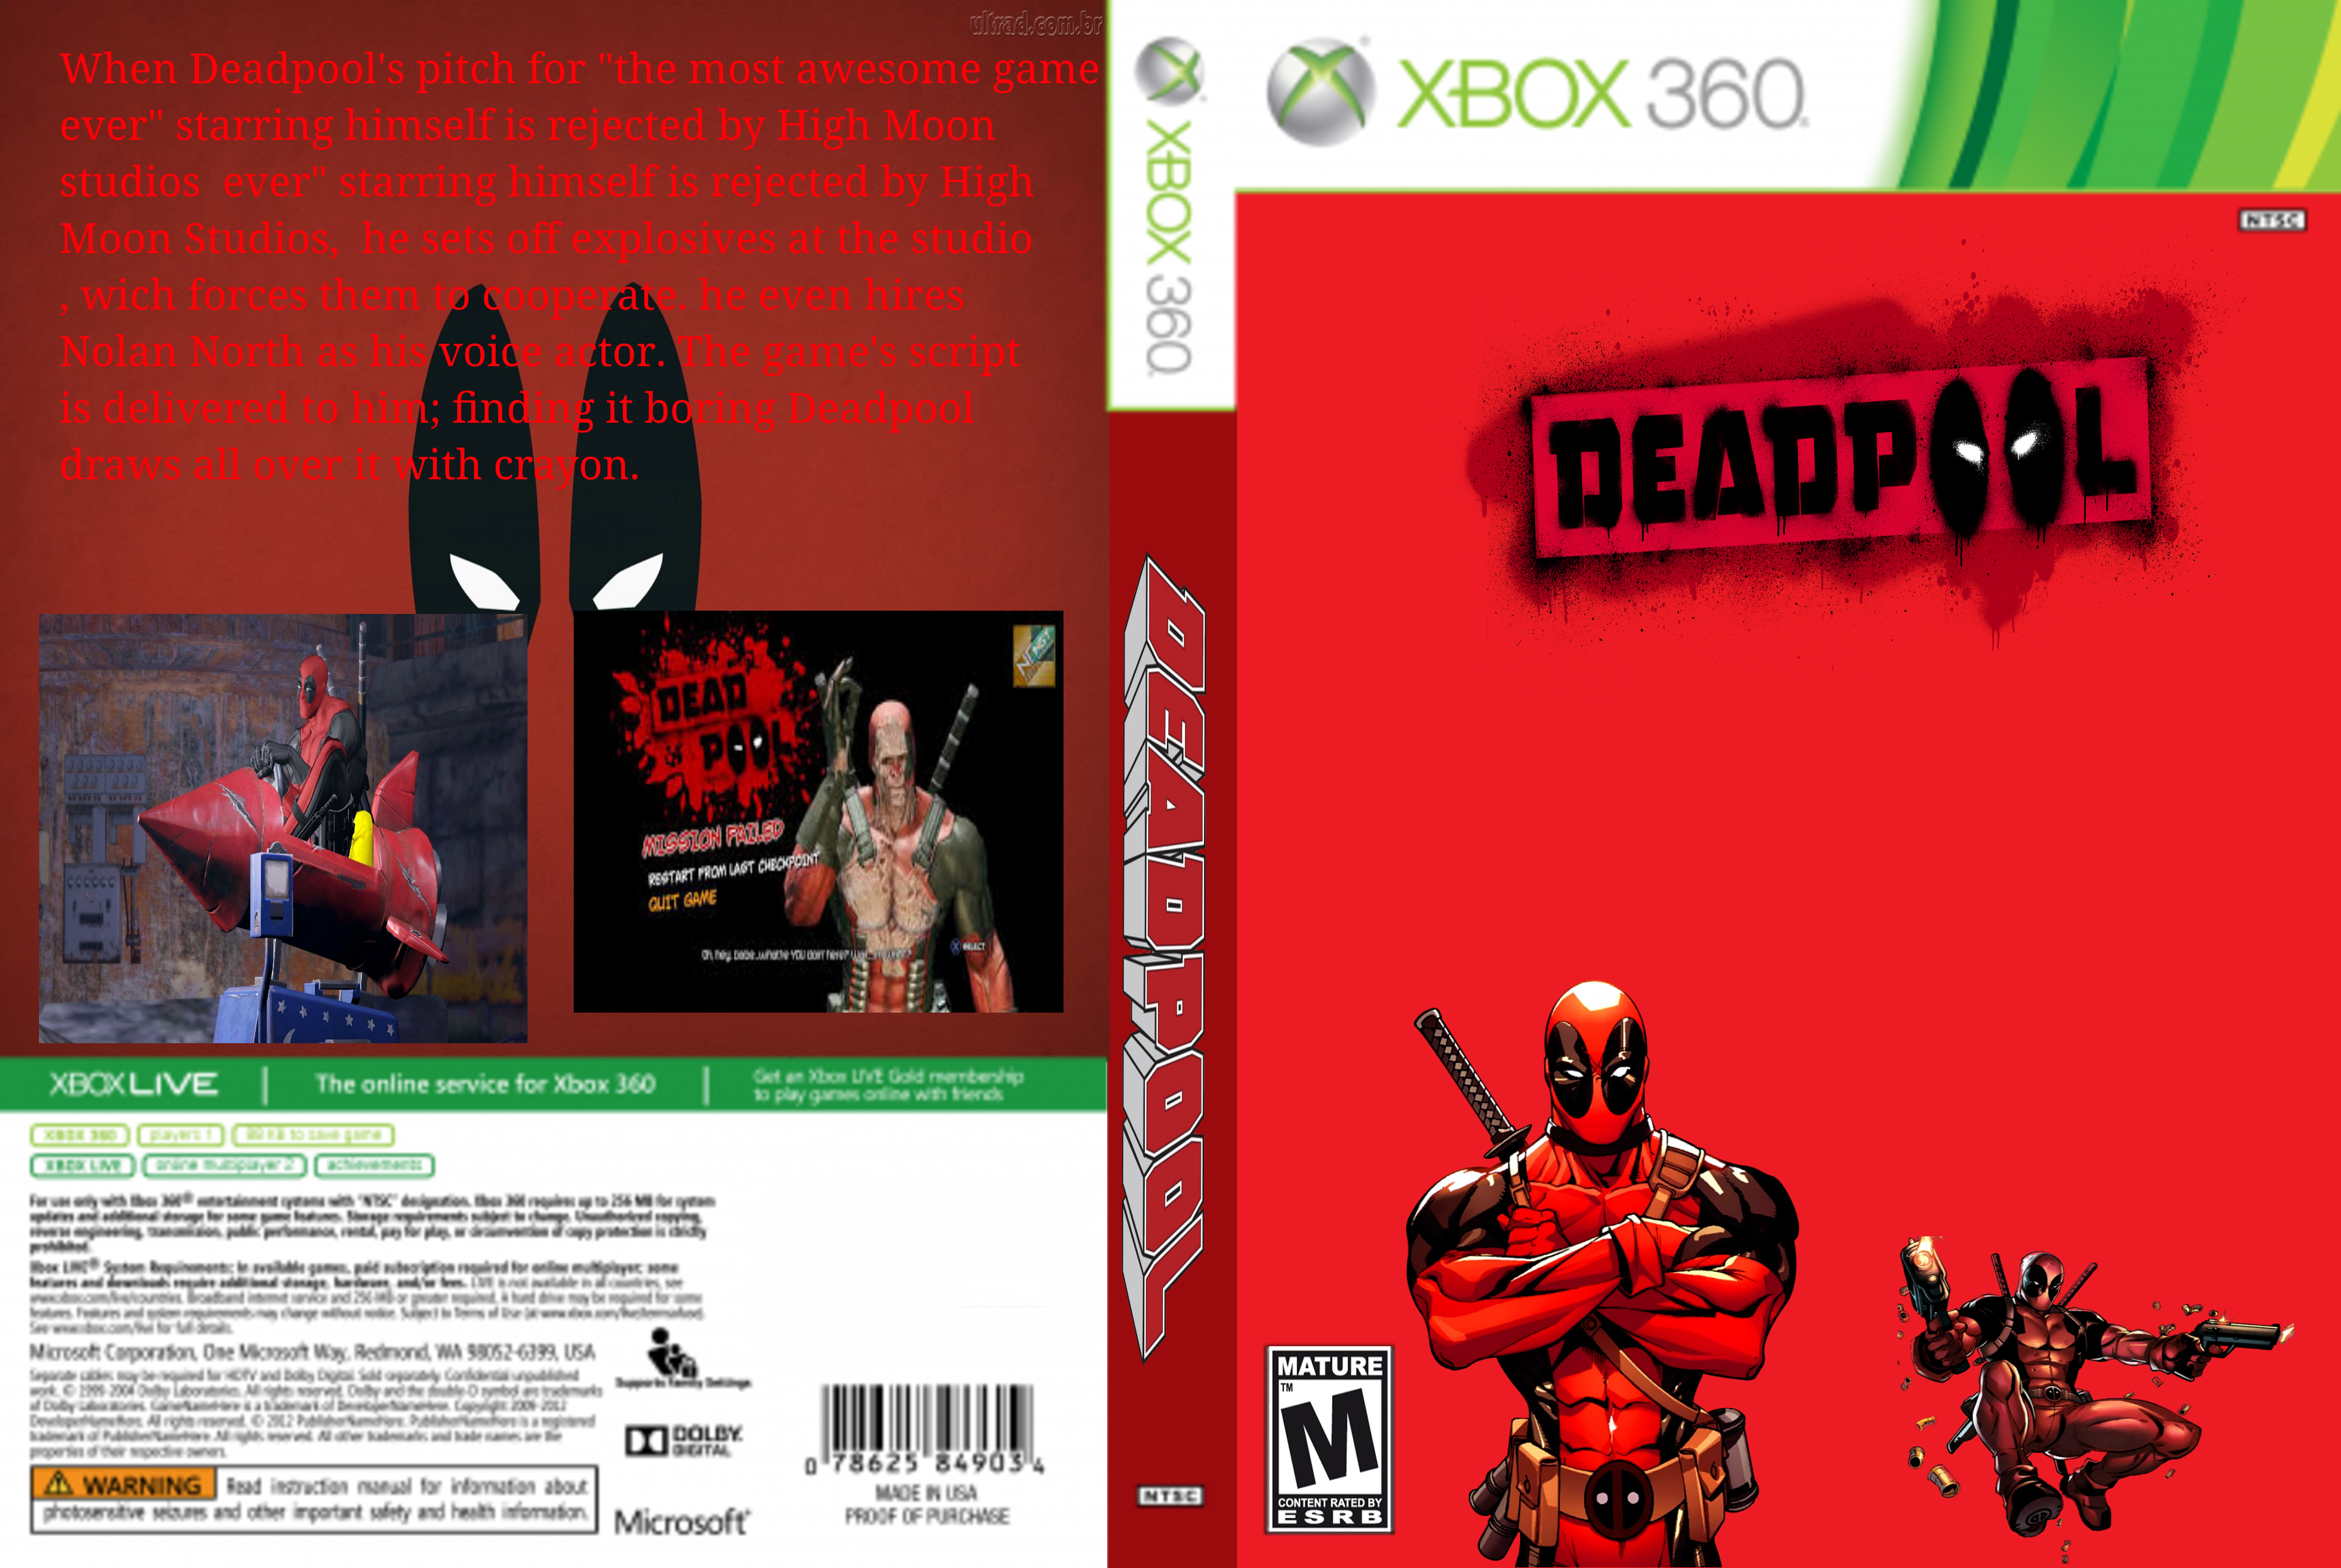 Deadpool - The Game box cover